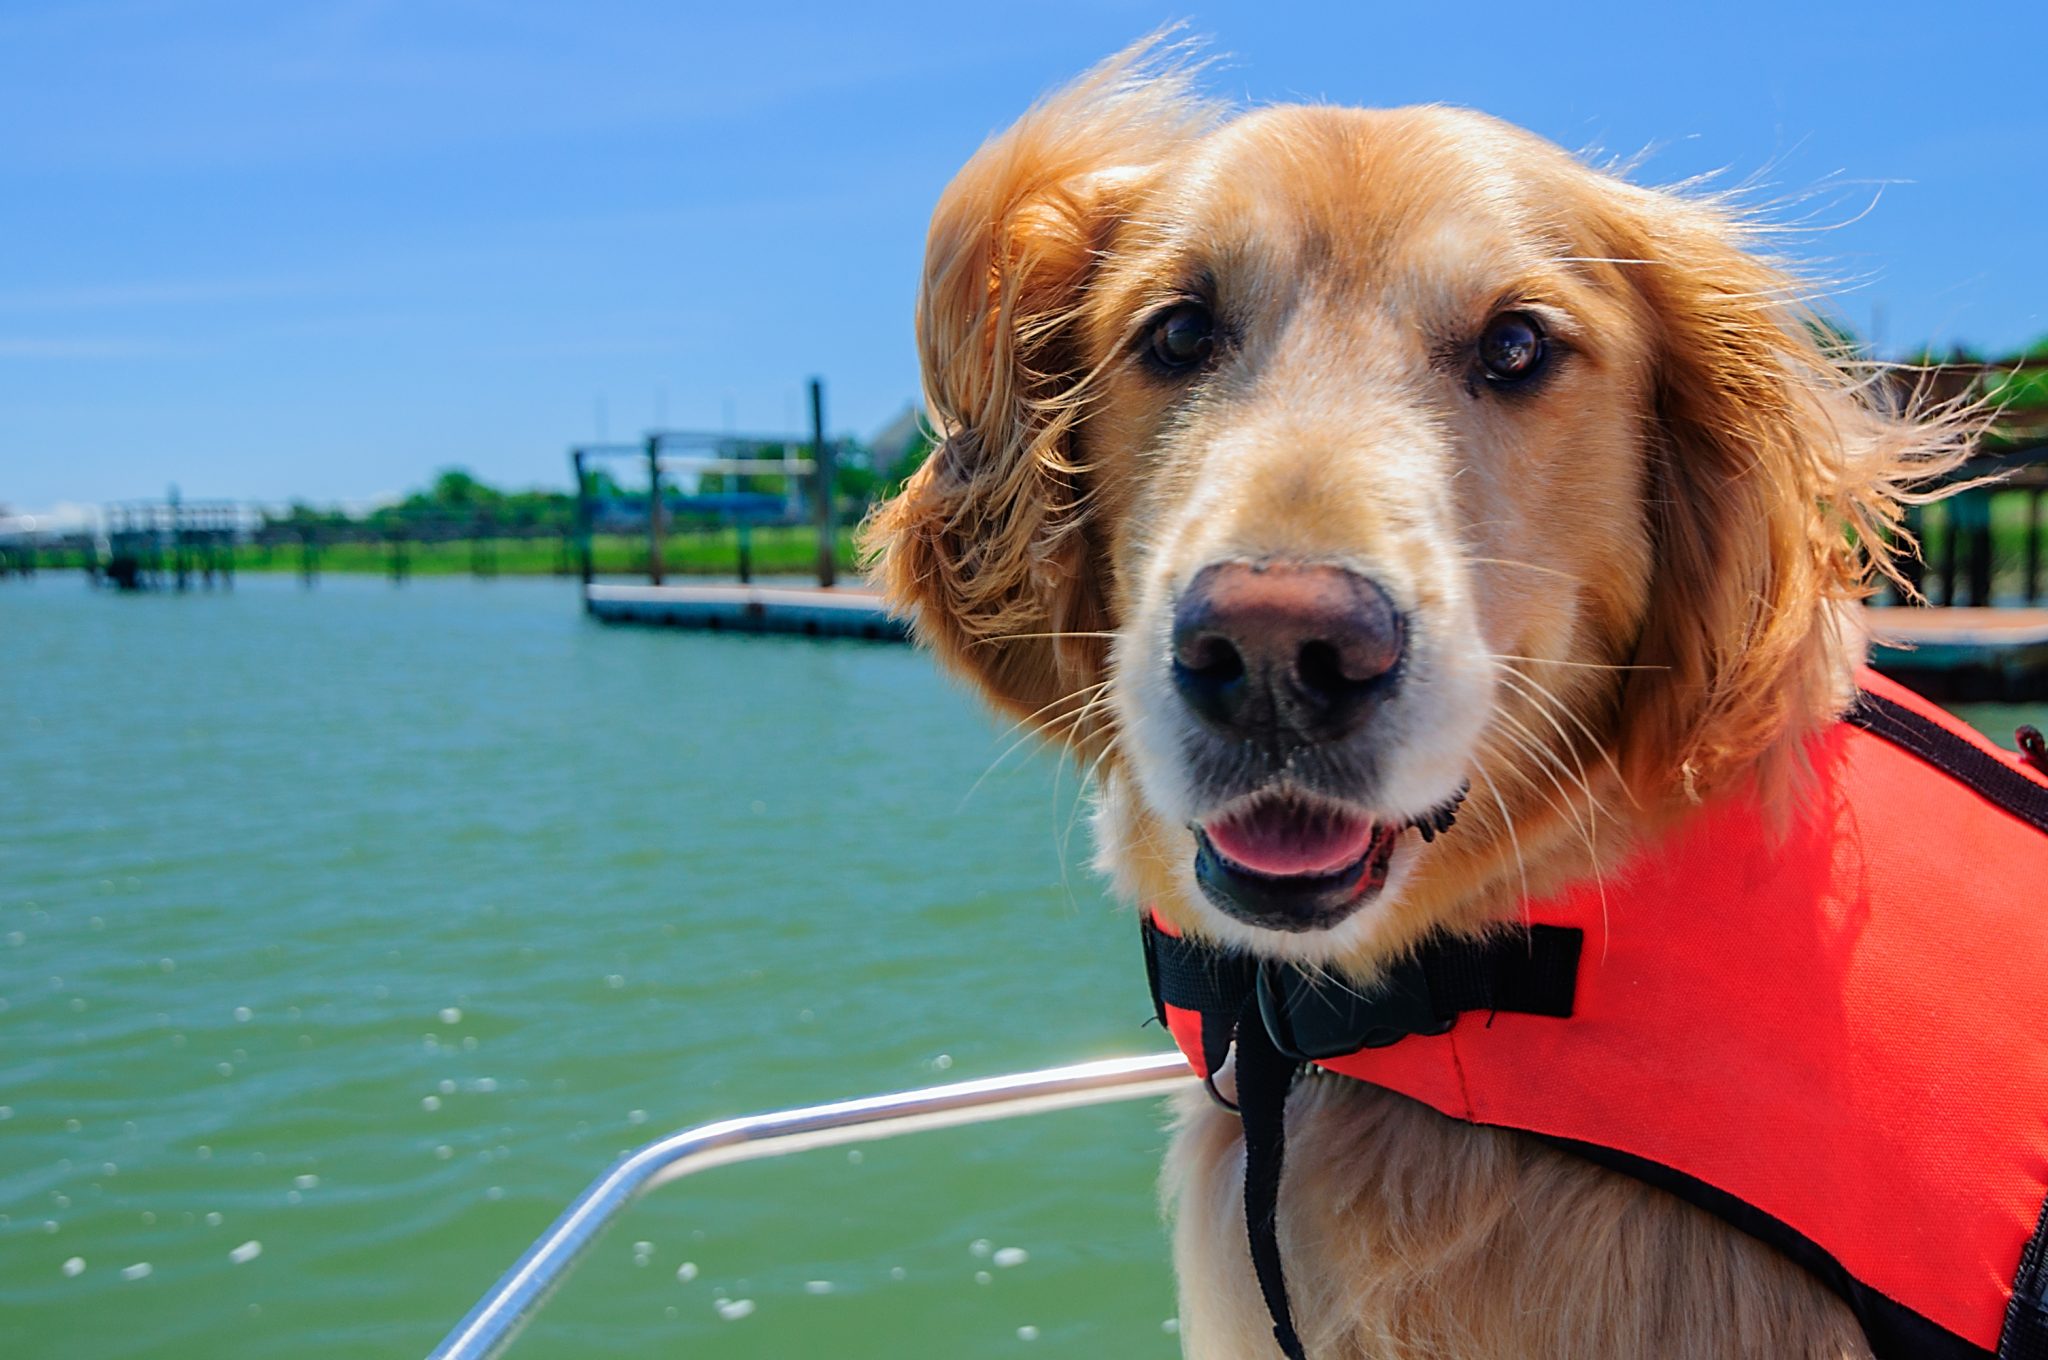 10 Summer Dog Safety Tips - To Beat The Heat